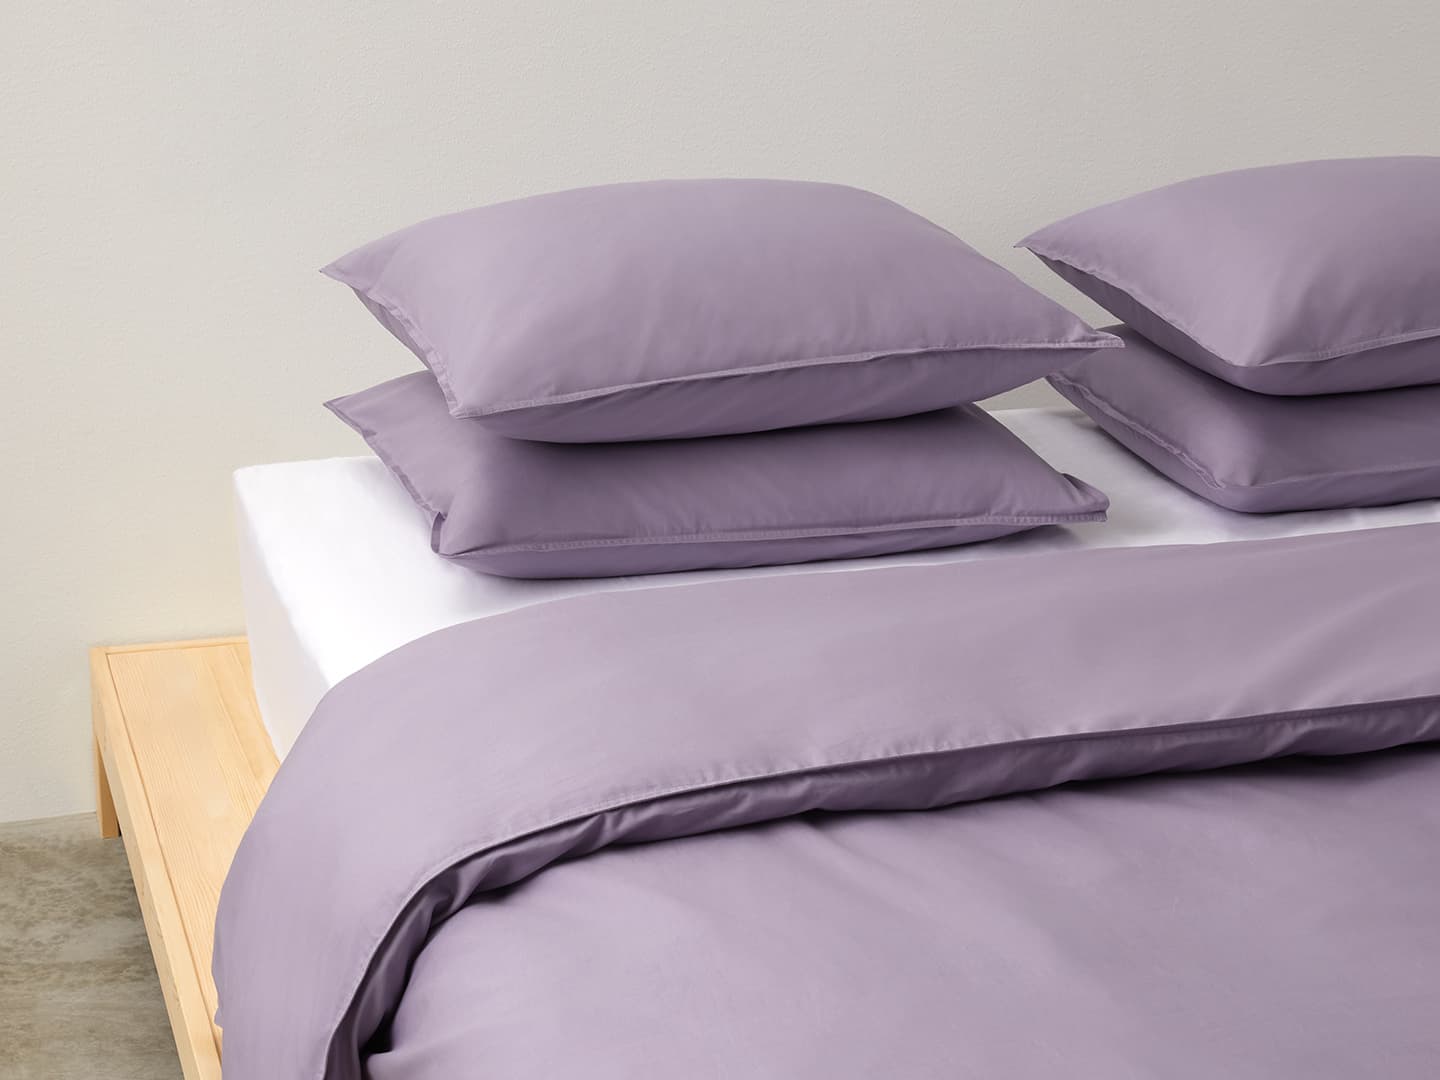 Duvet Cover Nejd - Dusty Lilac in the group Bedding / Duvet Covers at A L V A (1192)